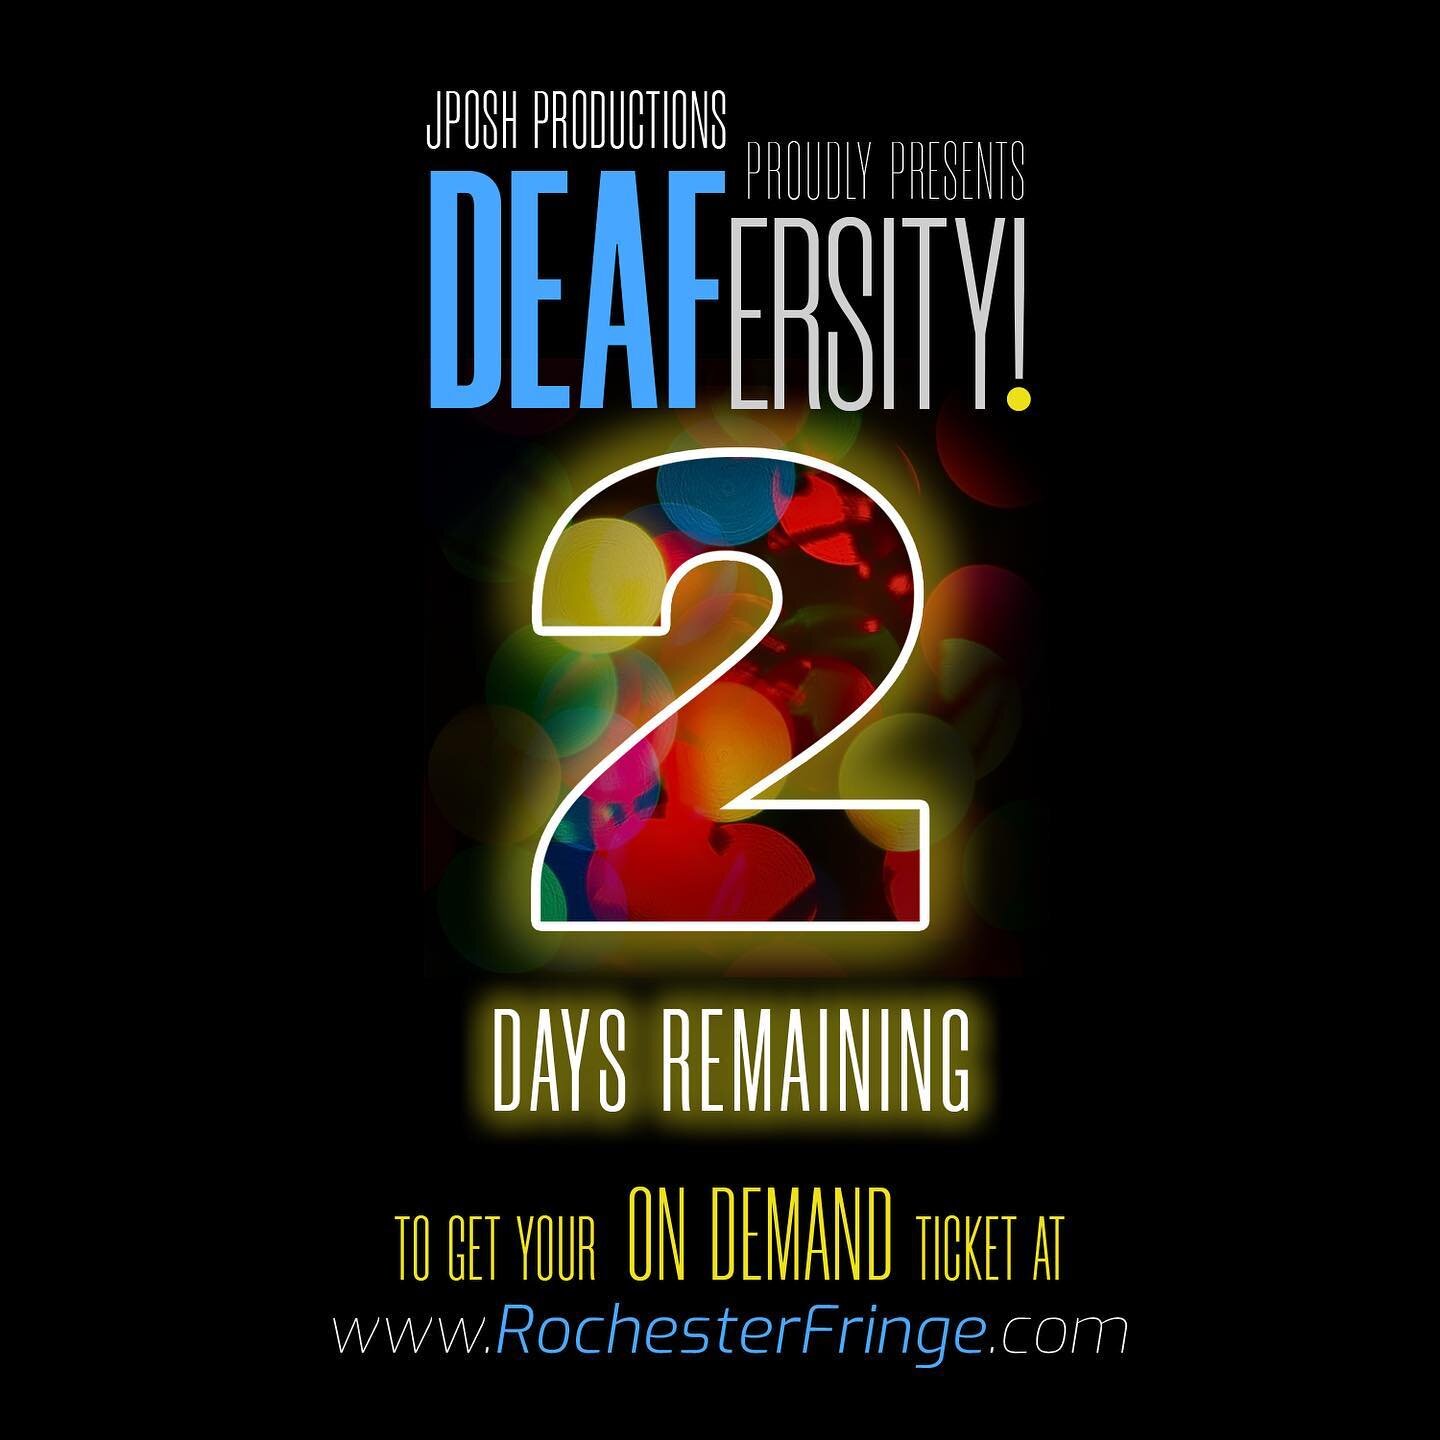 This is the last week to purchase tickets and celebrate International  Week of the Deaf with us!!! JPosh Productions proudly presents DEAFersity! and has joined the 2020 Virtual Rochester Fringe Festival vía On Demand.

Tickets are only AVAILABLE fo